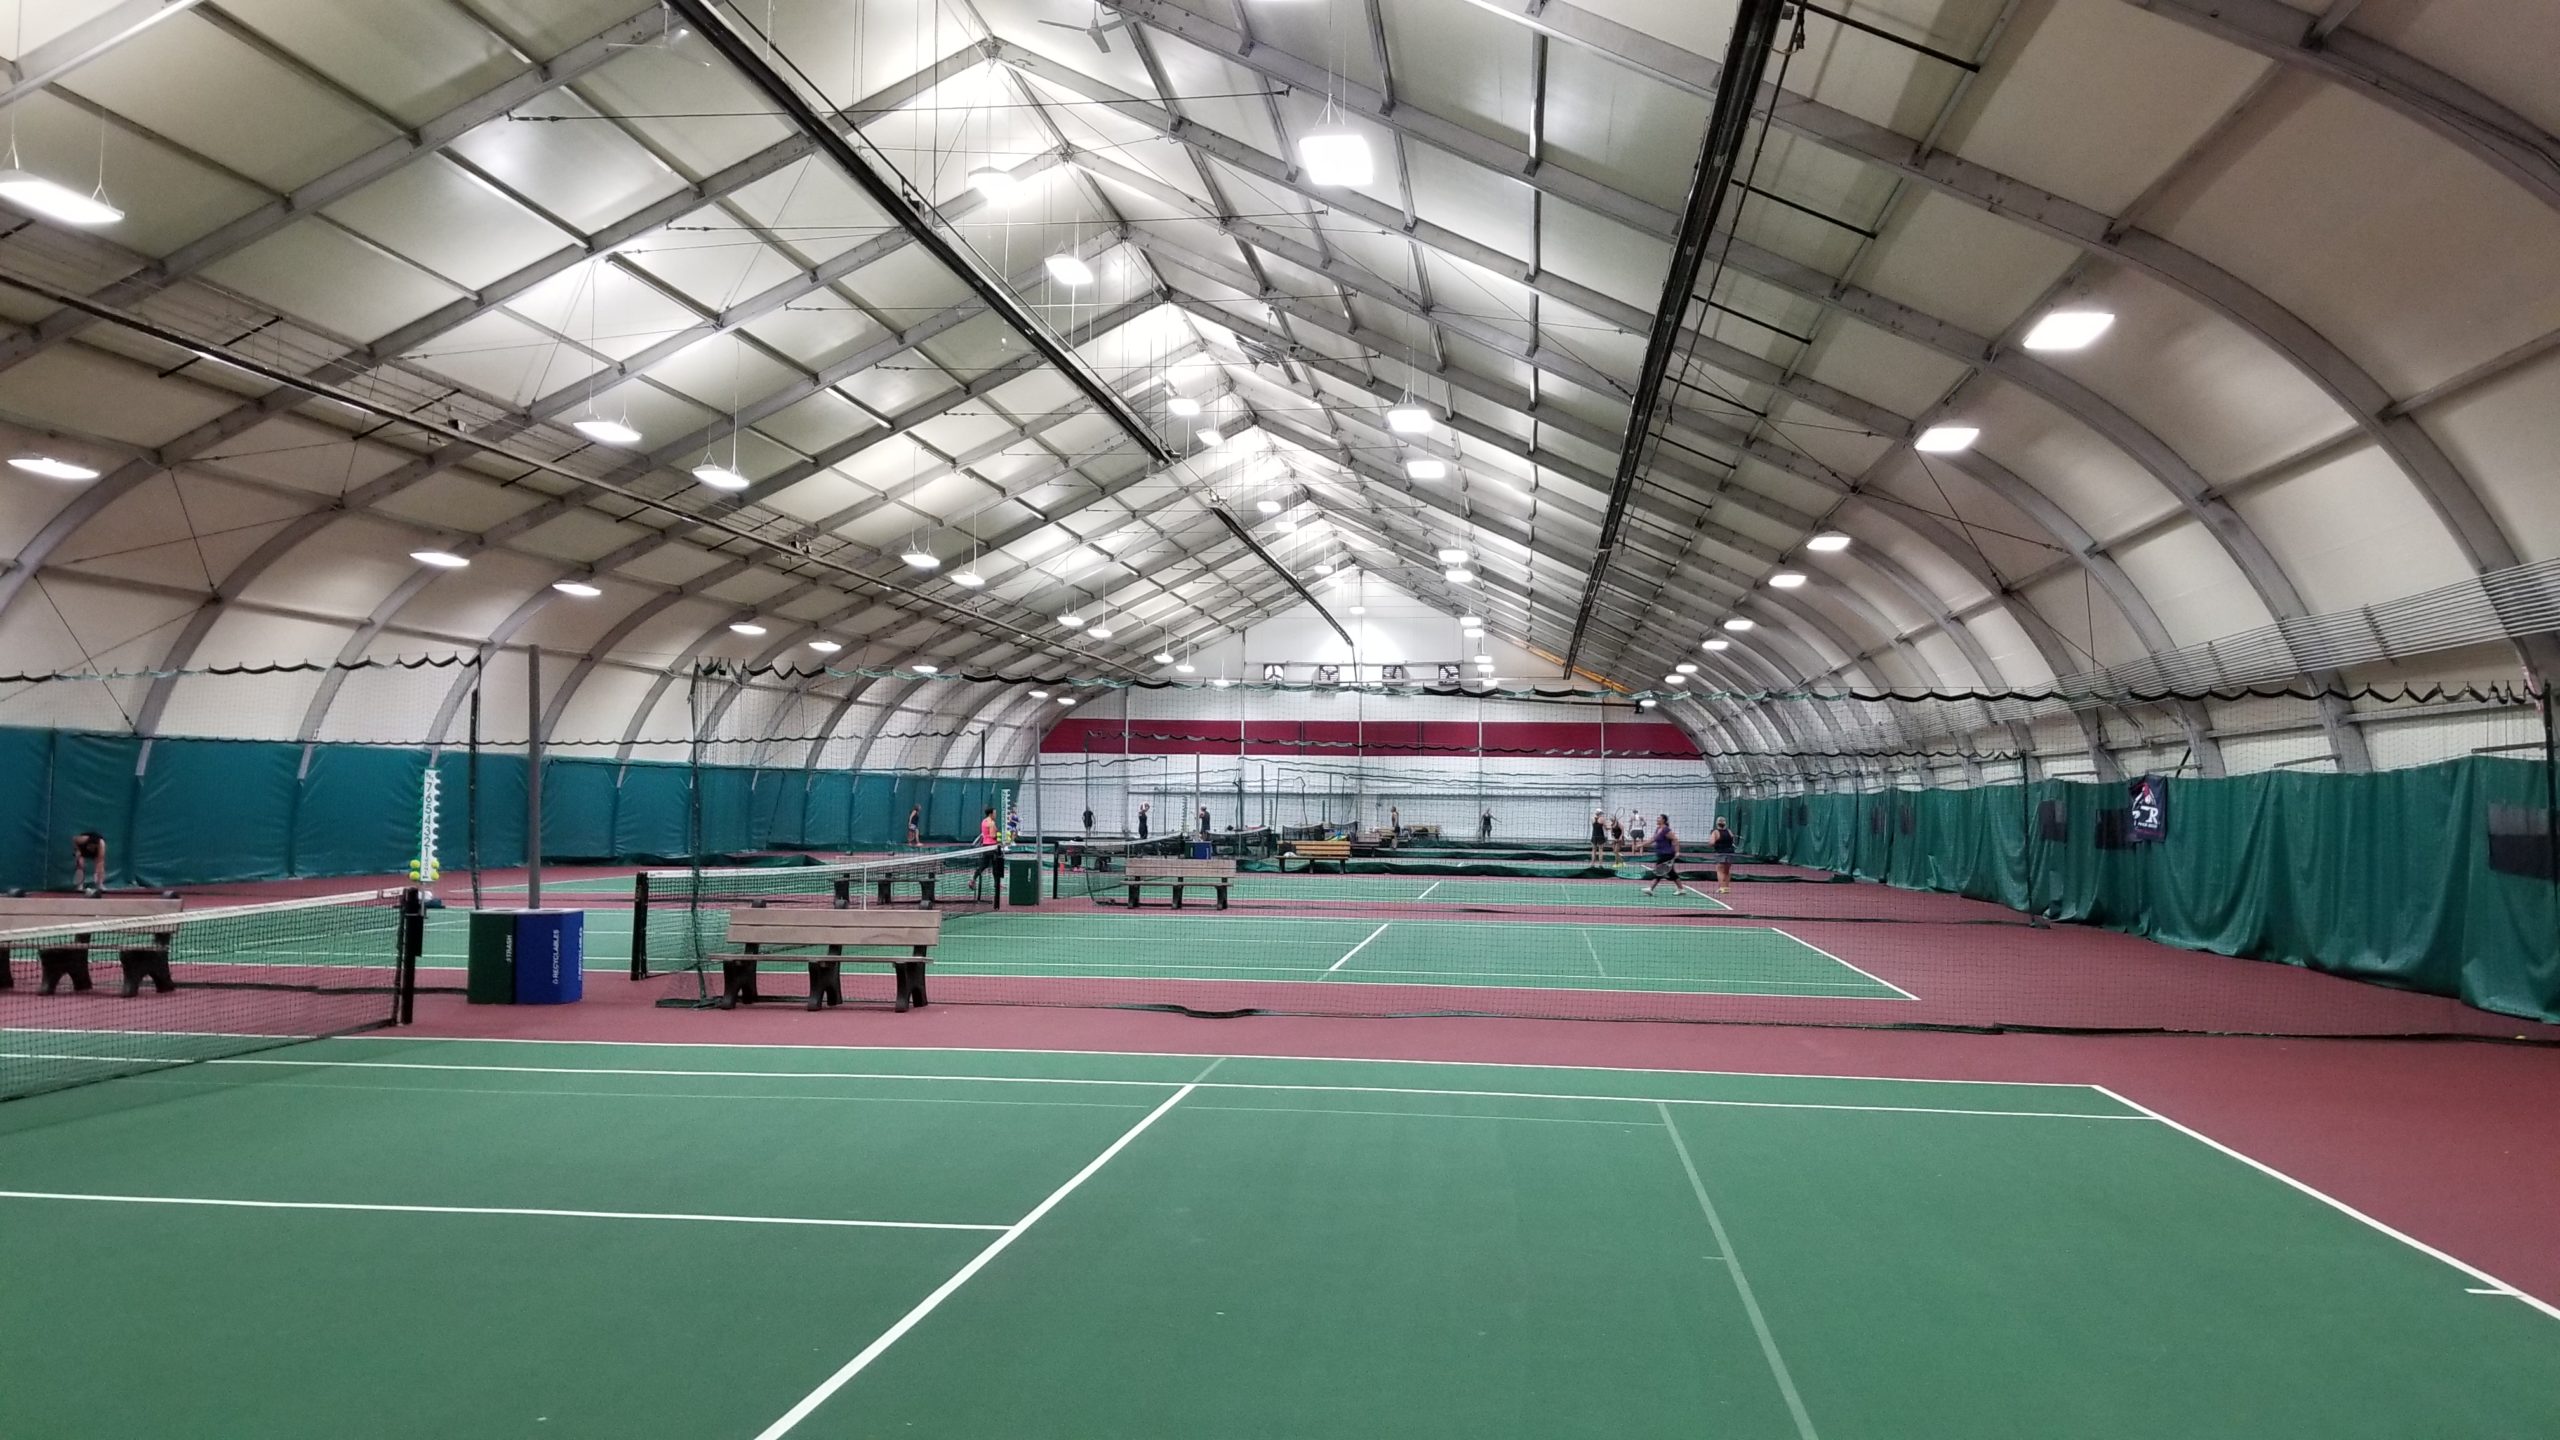 Indoor Tennis, Basketball, Ice hockey and more